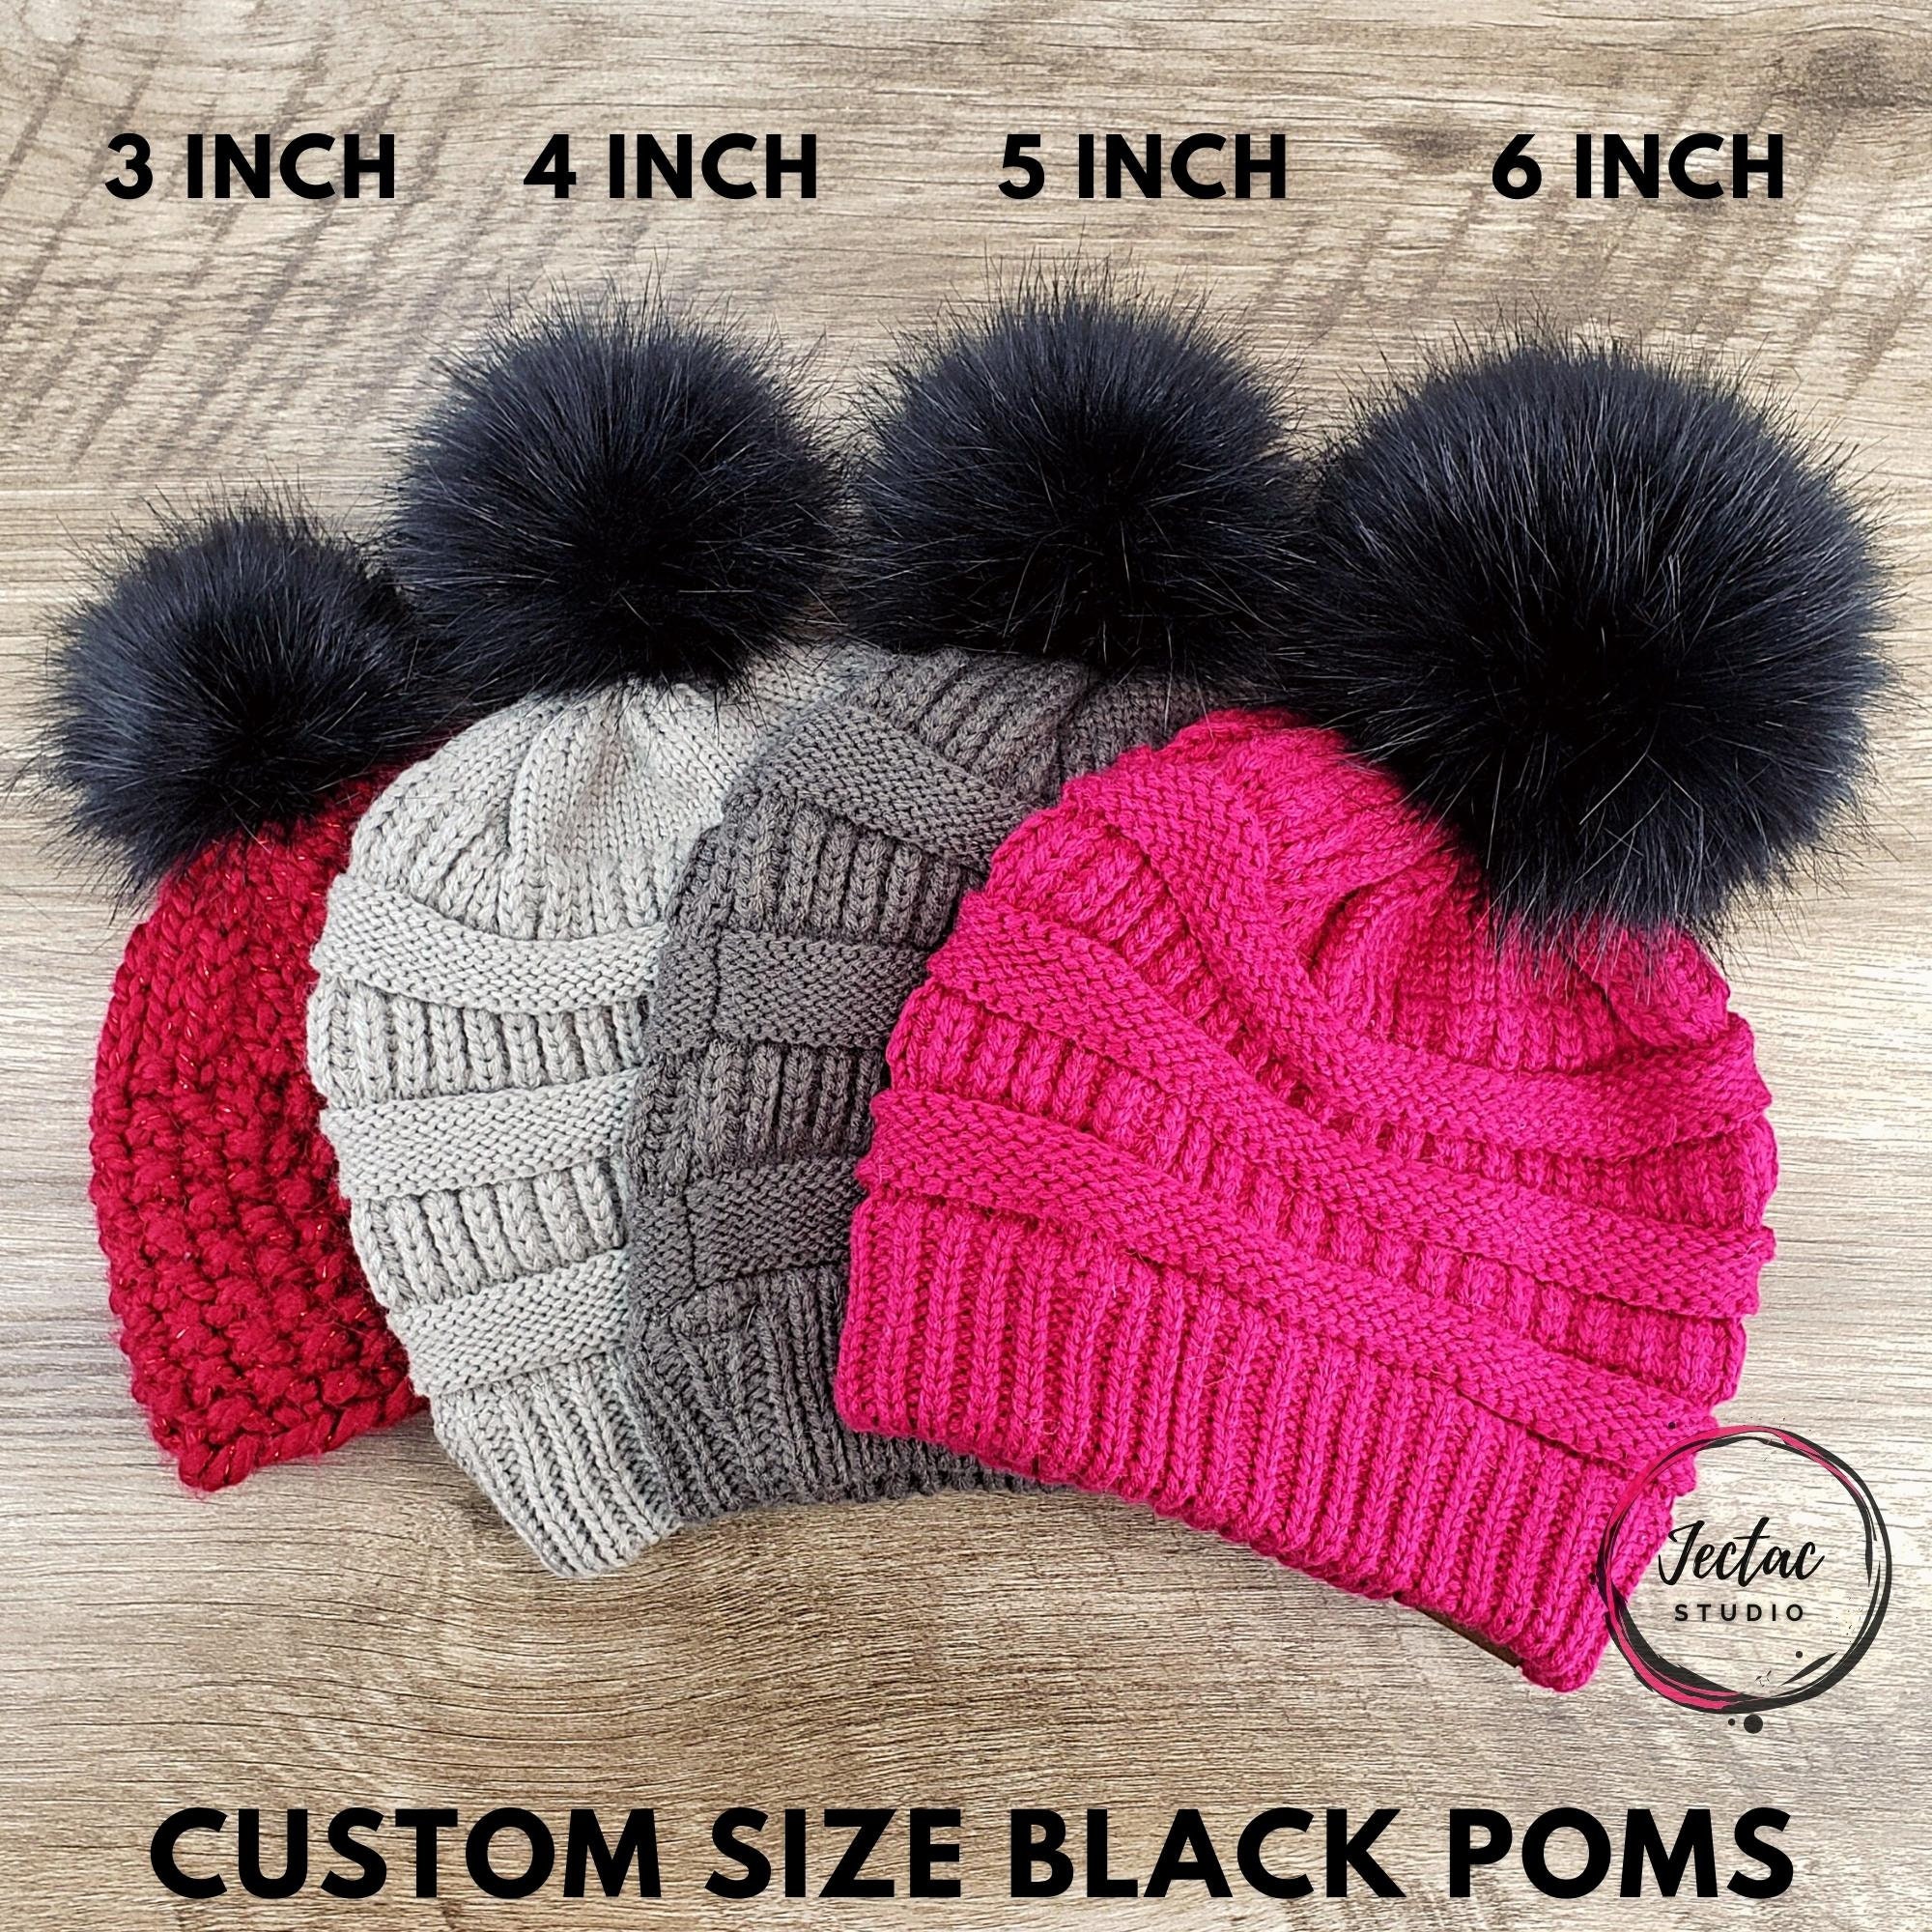  Pack of 12 Yarn Pom Poms for Hats 8CM-3INCH Party